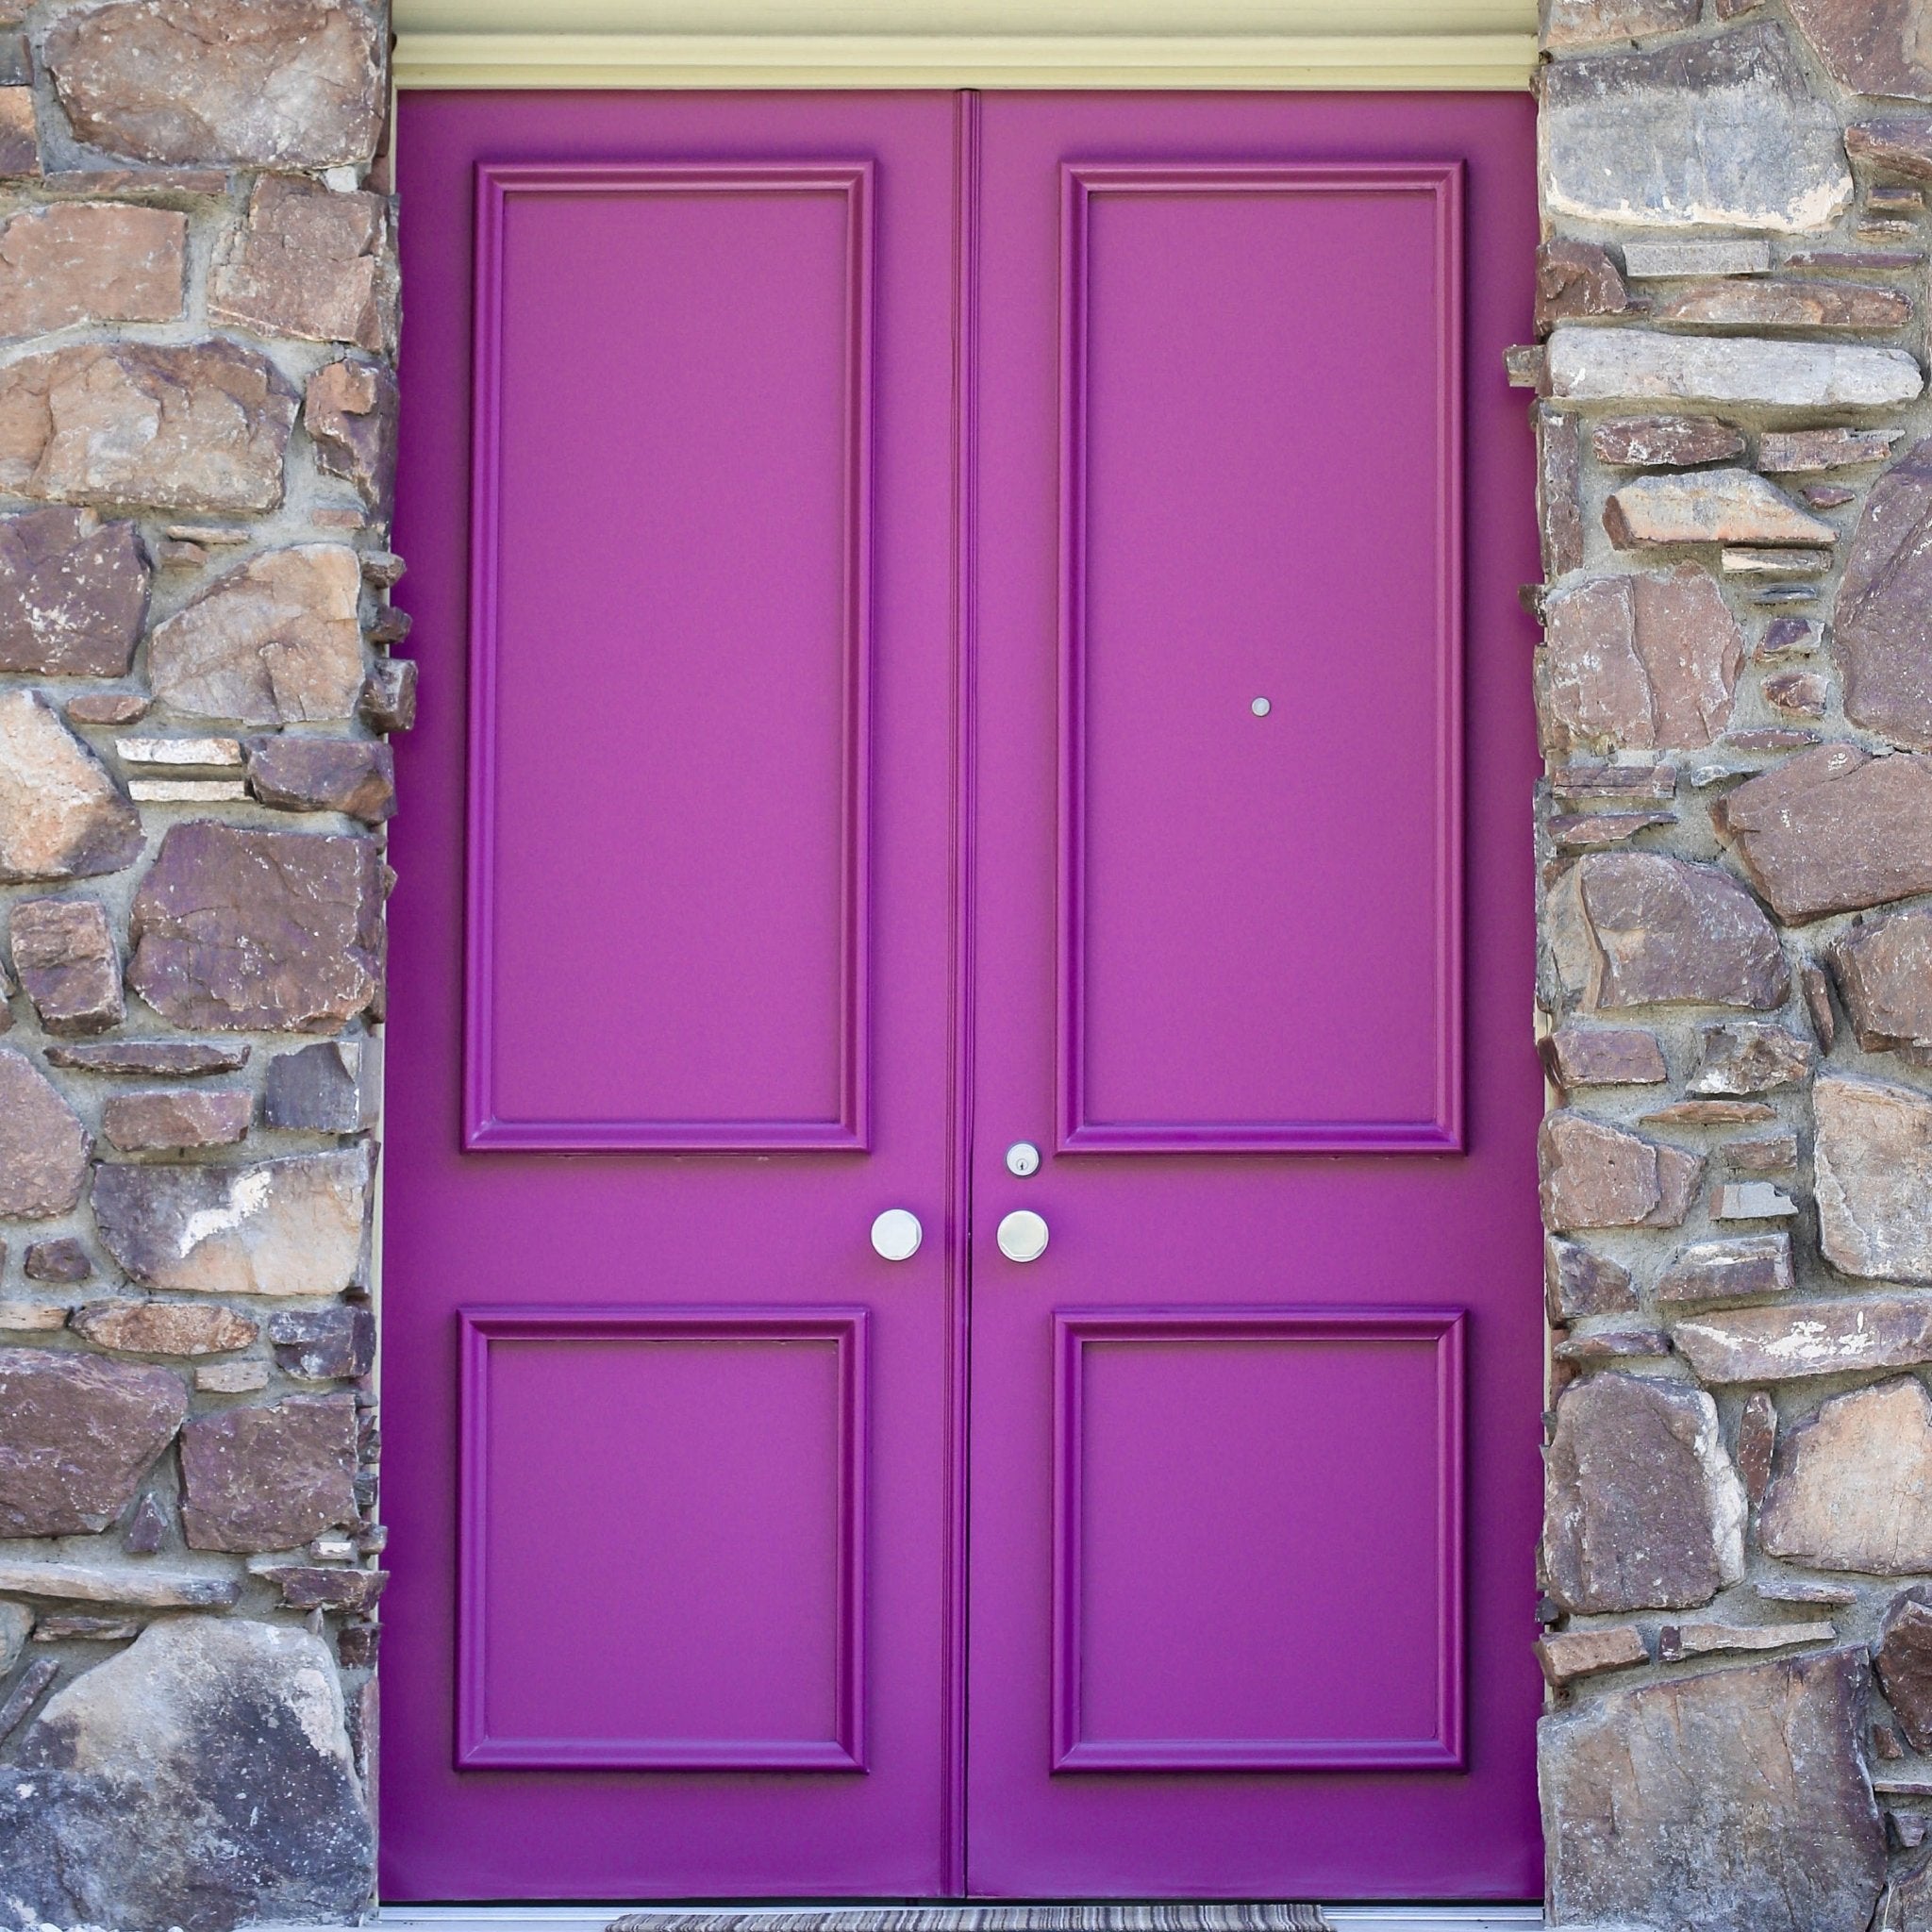 Doors of Palm Springs Photograph by Kelly Segré - Purple Door of Palm Springs - Destination PSP